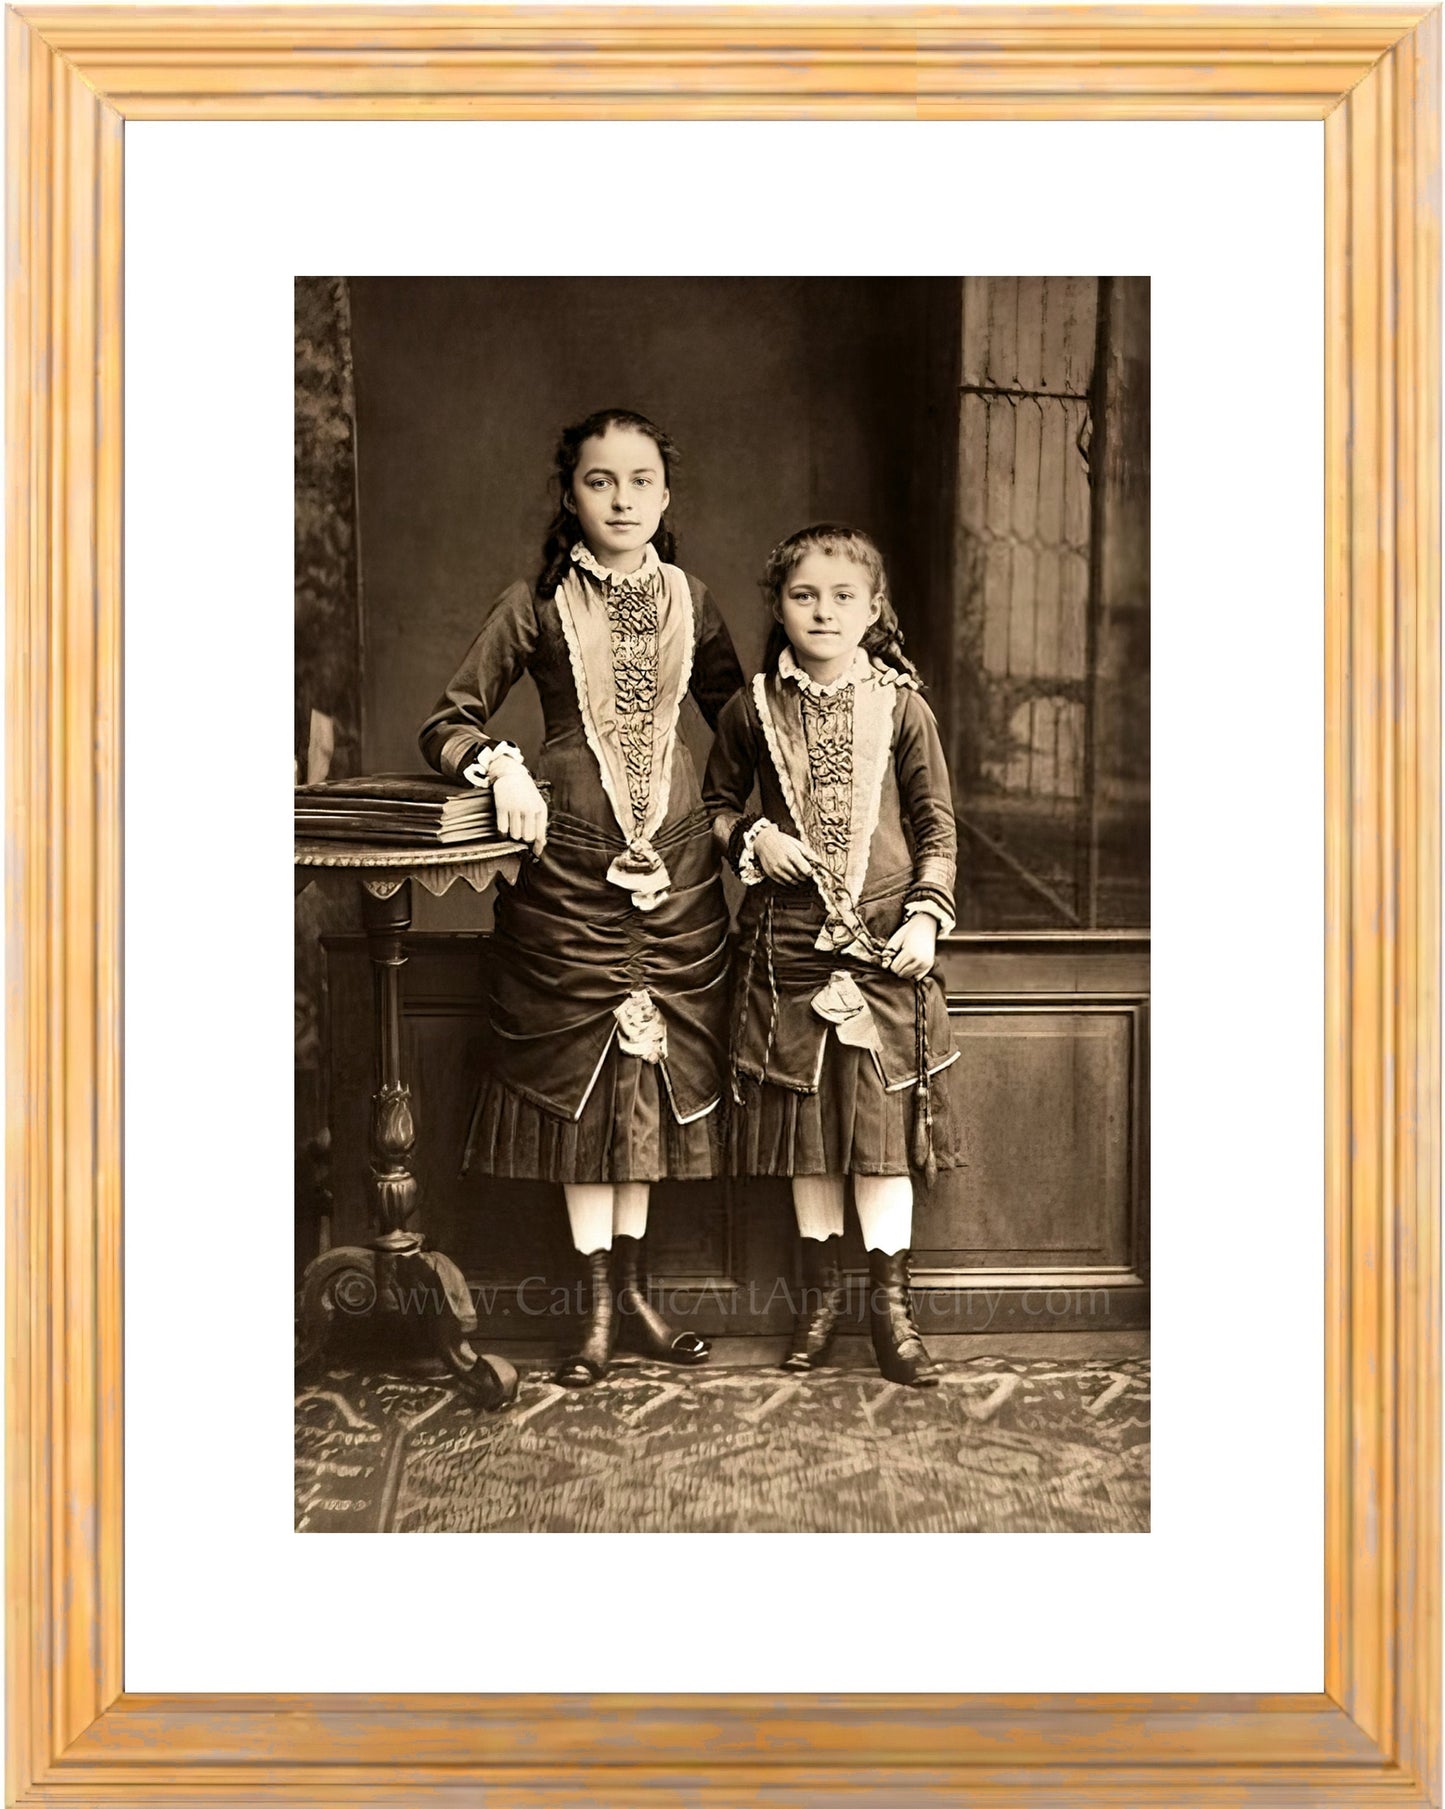 St. Therese & Celine Martin (St. Therese of Lisieux with her sister) Catholic photo print Saint Theresa